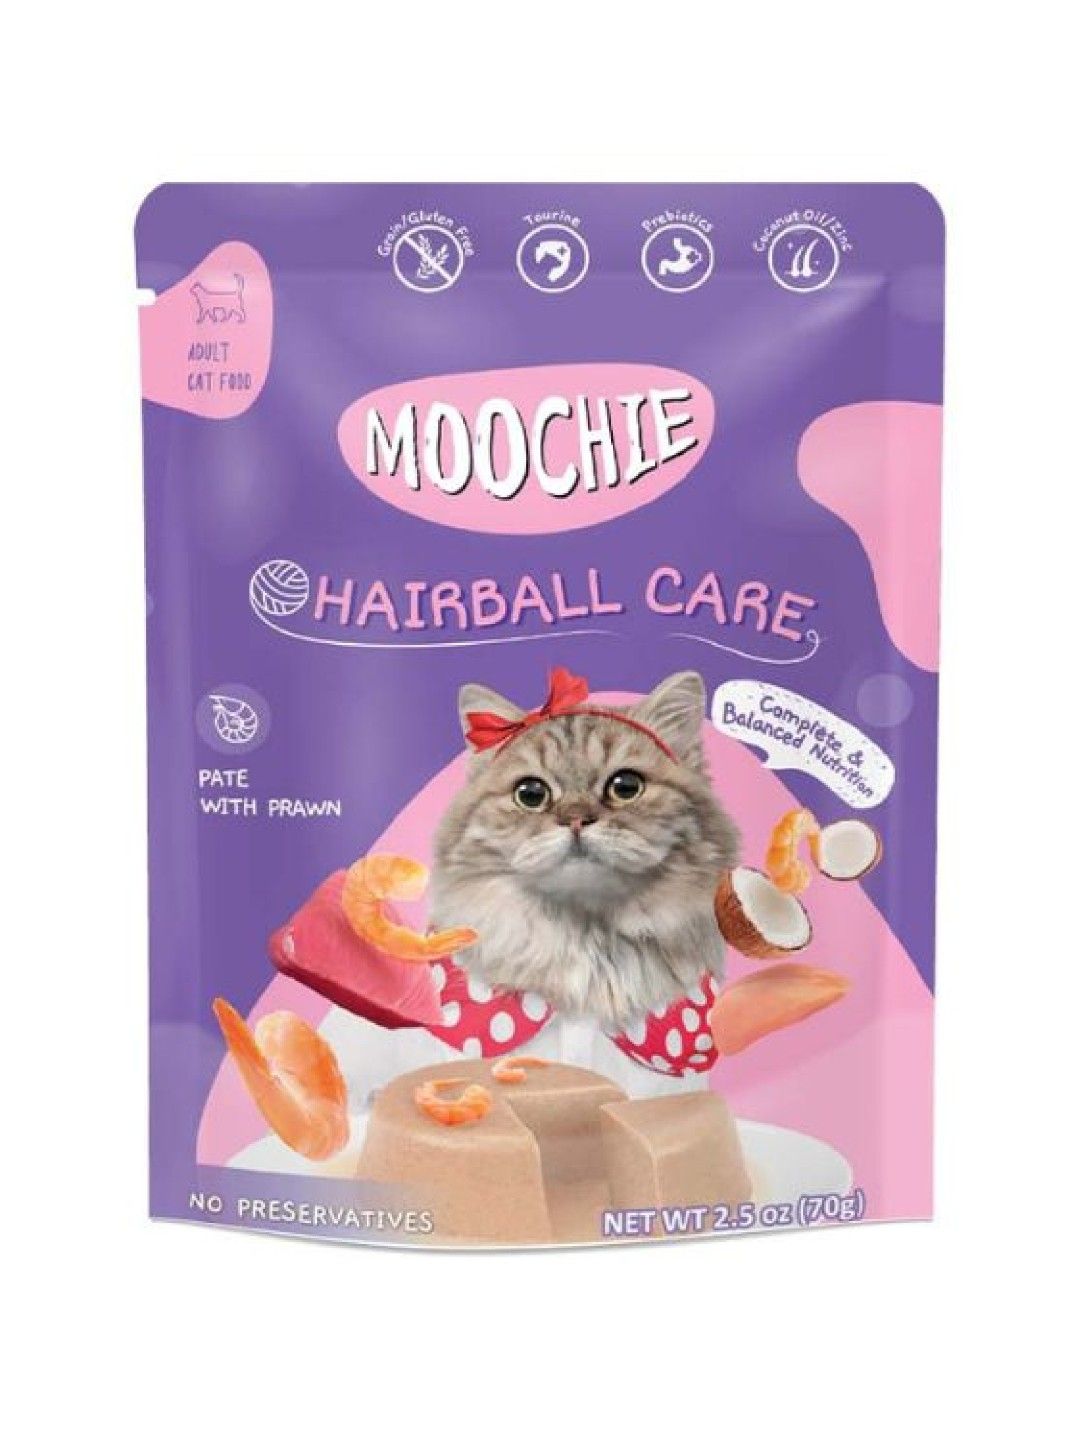 Moochie Cat Food Pate with Prawn Hairball Care (70g)